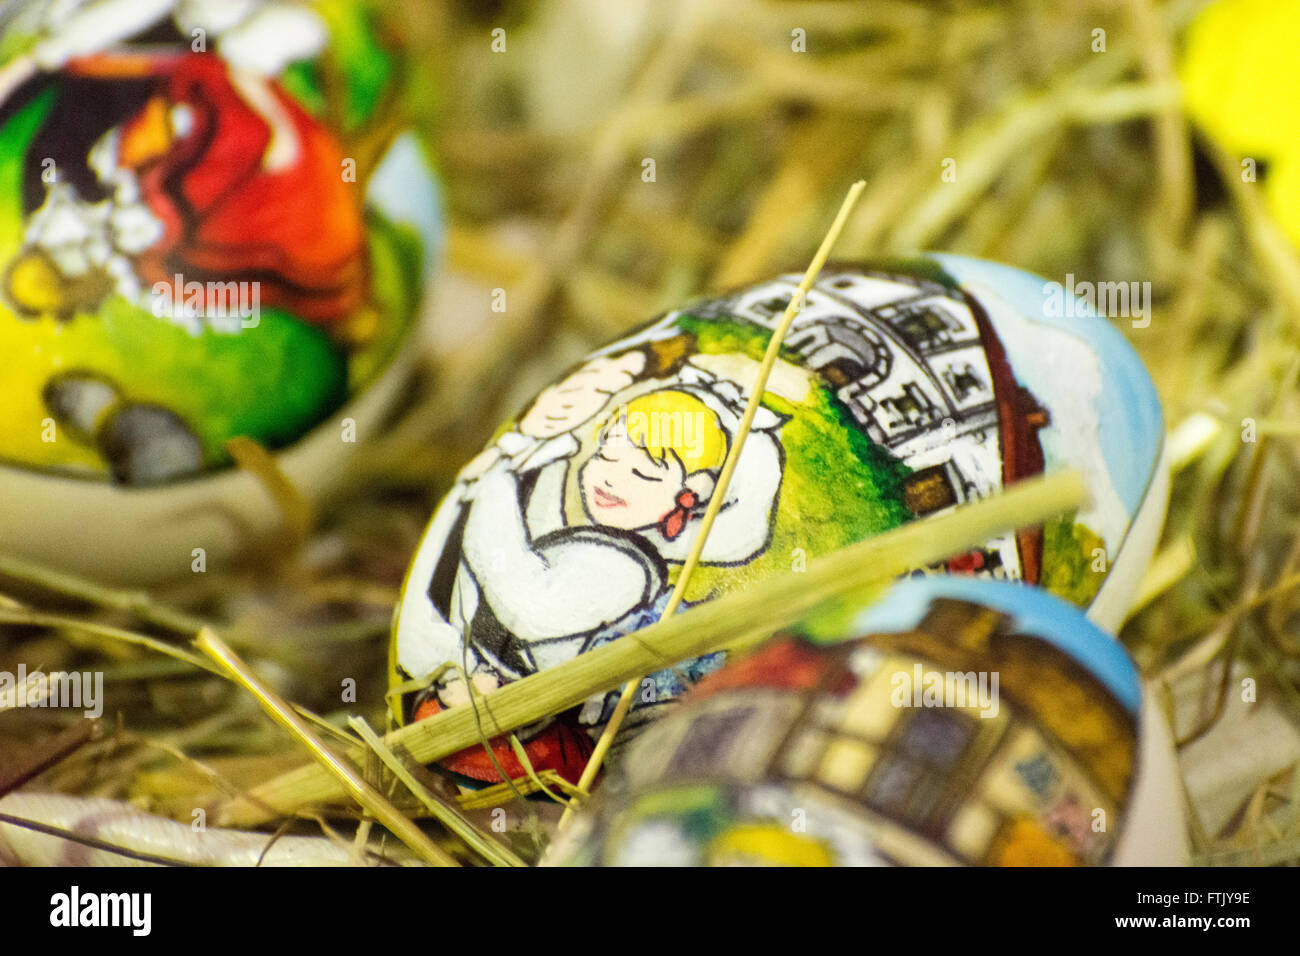 Pola de Siero, Spain. 29th March, 2016. A painted goose egg which represents an Asturian scene at the Feast of Easter Eggs of Pola de Siero, the only Spanish city in which this feast is celebrated, on the first Tuesday after Easter Sunday, with thousands of eggs painted by hand. © David Gato/Alamy Live News Stock Photo